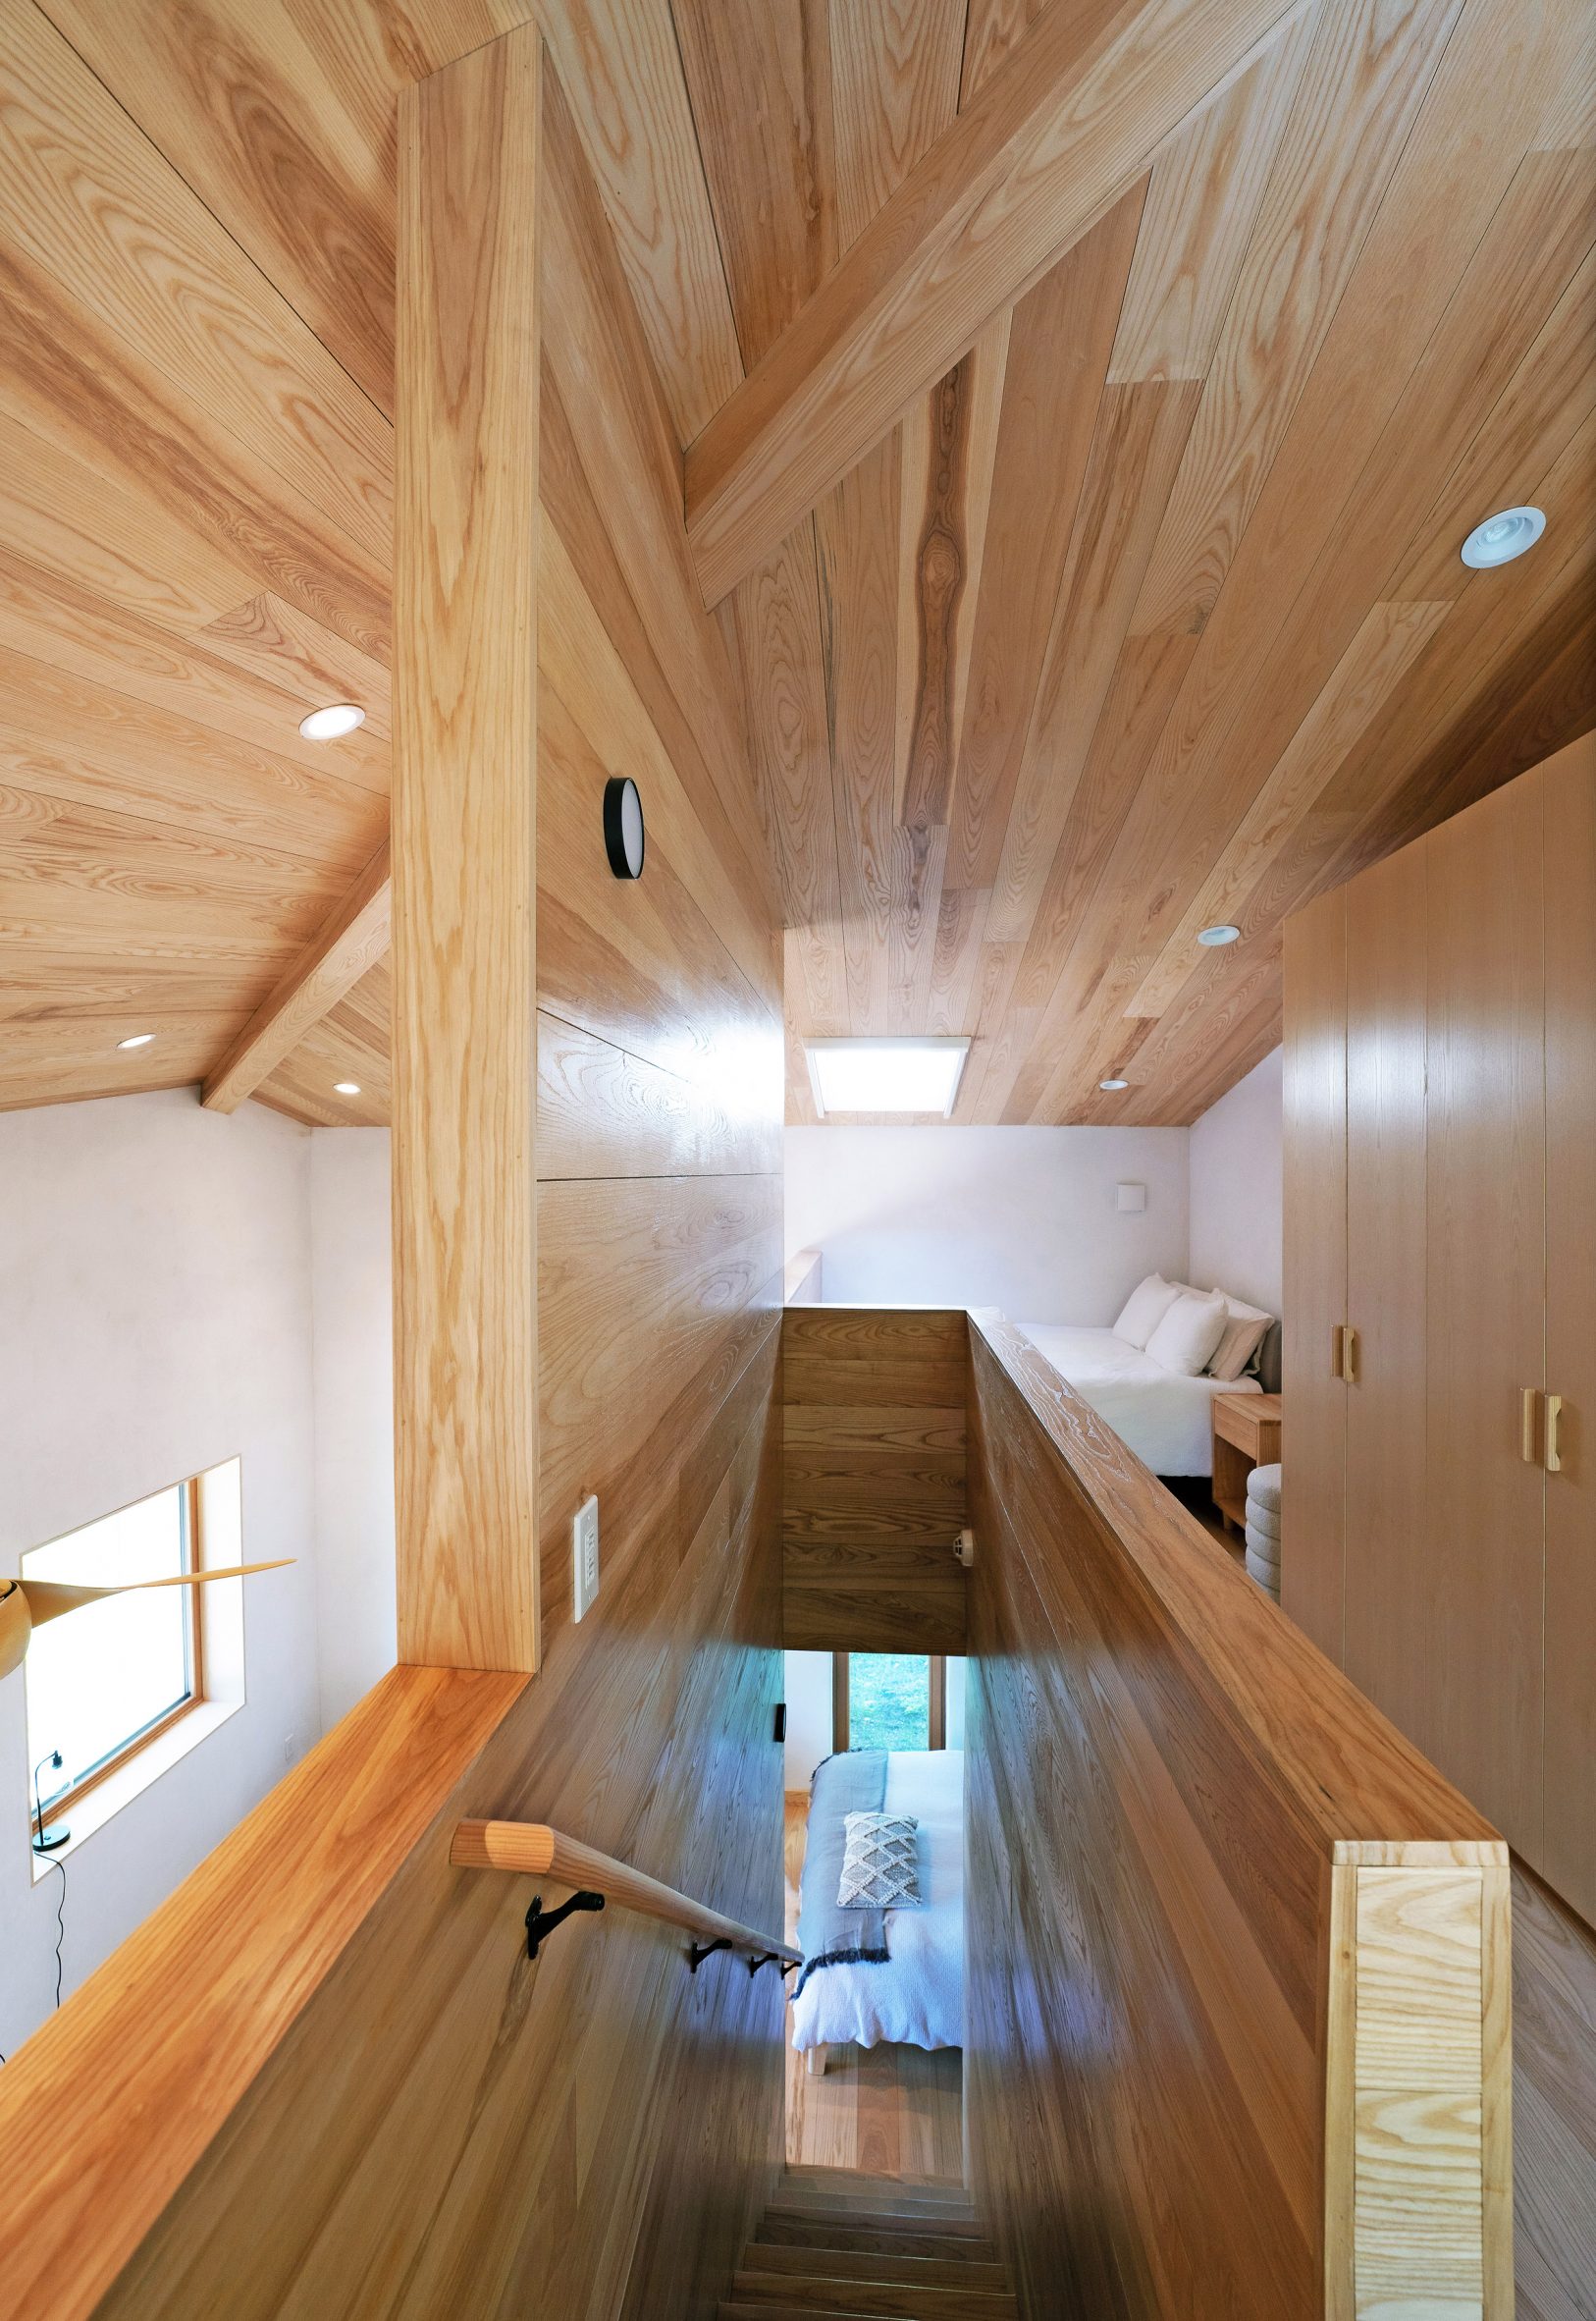 The landing on a second floor in a cabin